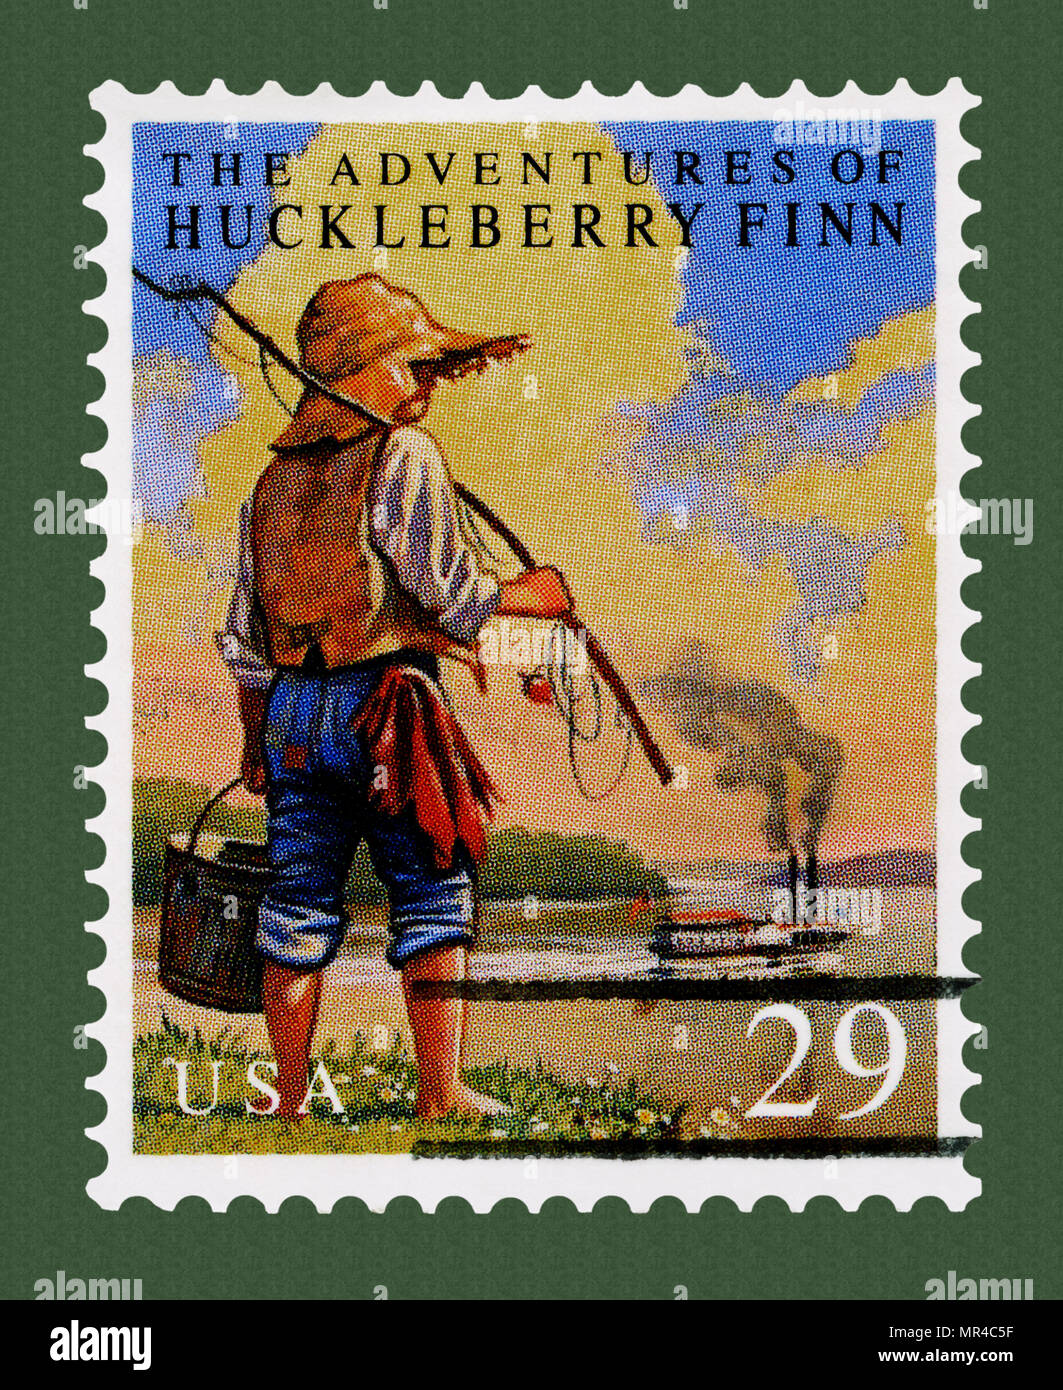 Adventures Of Huckleberry Finn Stamp: Children's literature classic books on postage stamps. Stock Photo